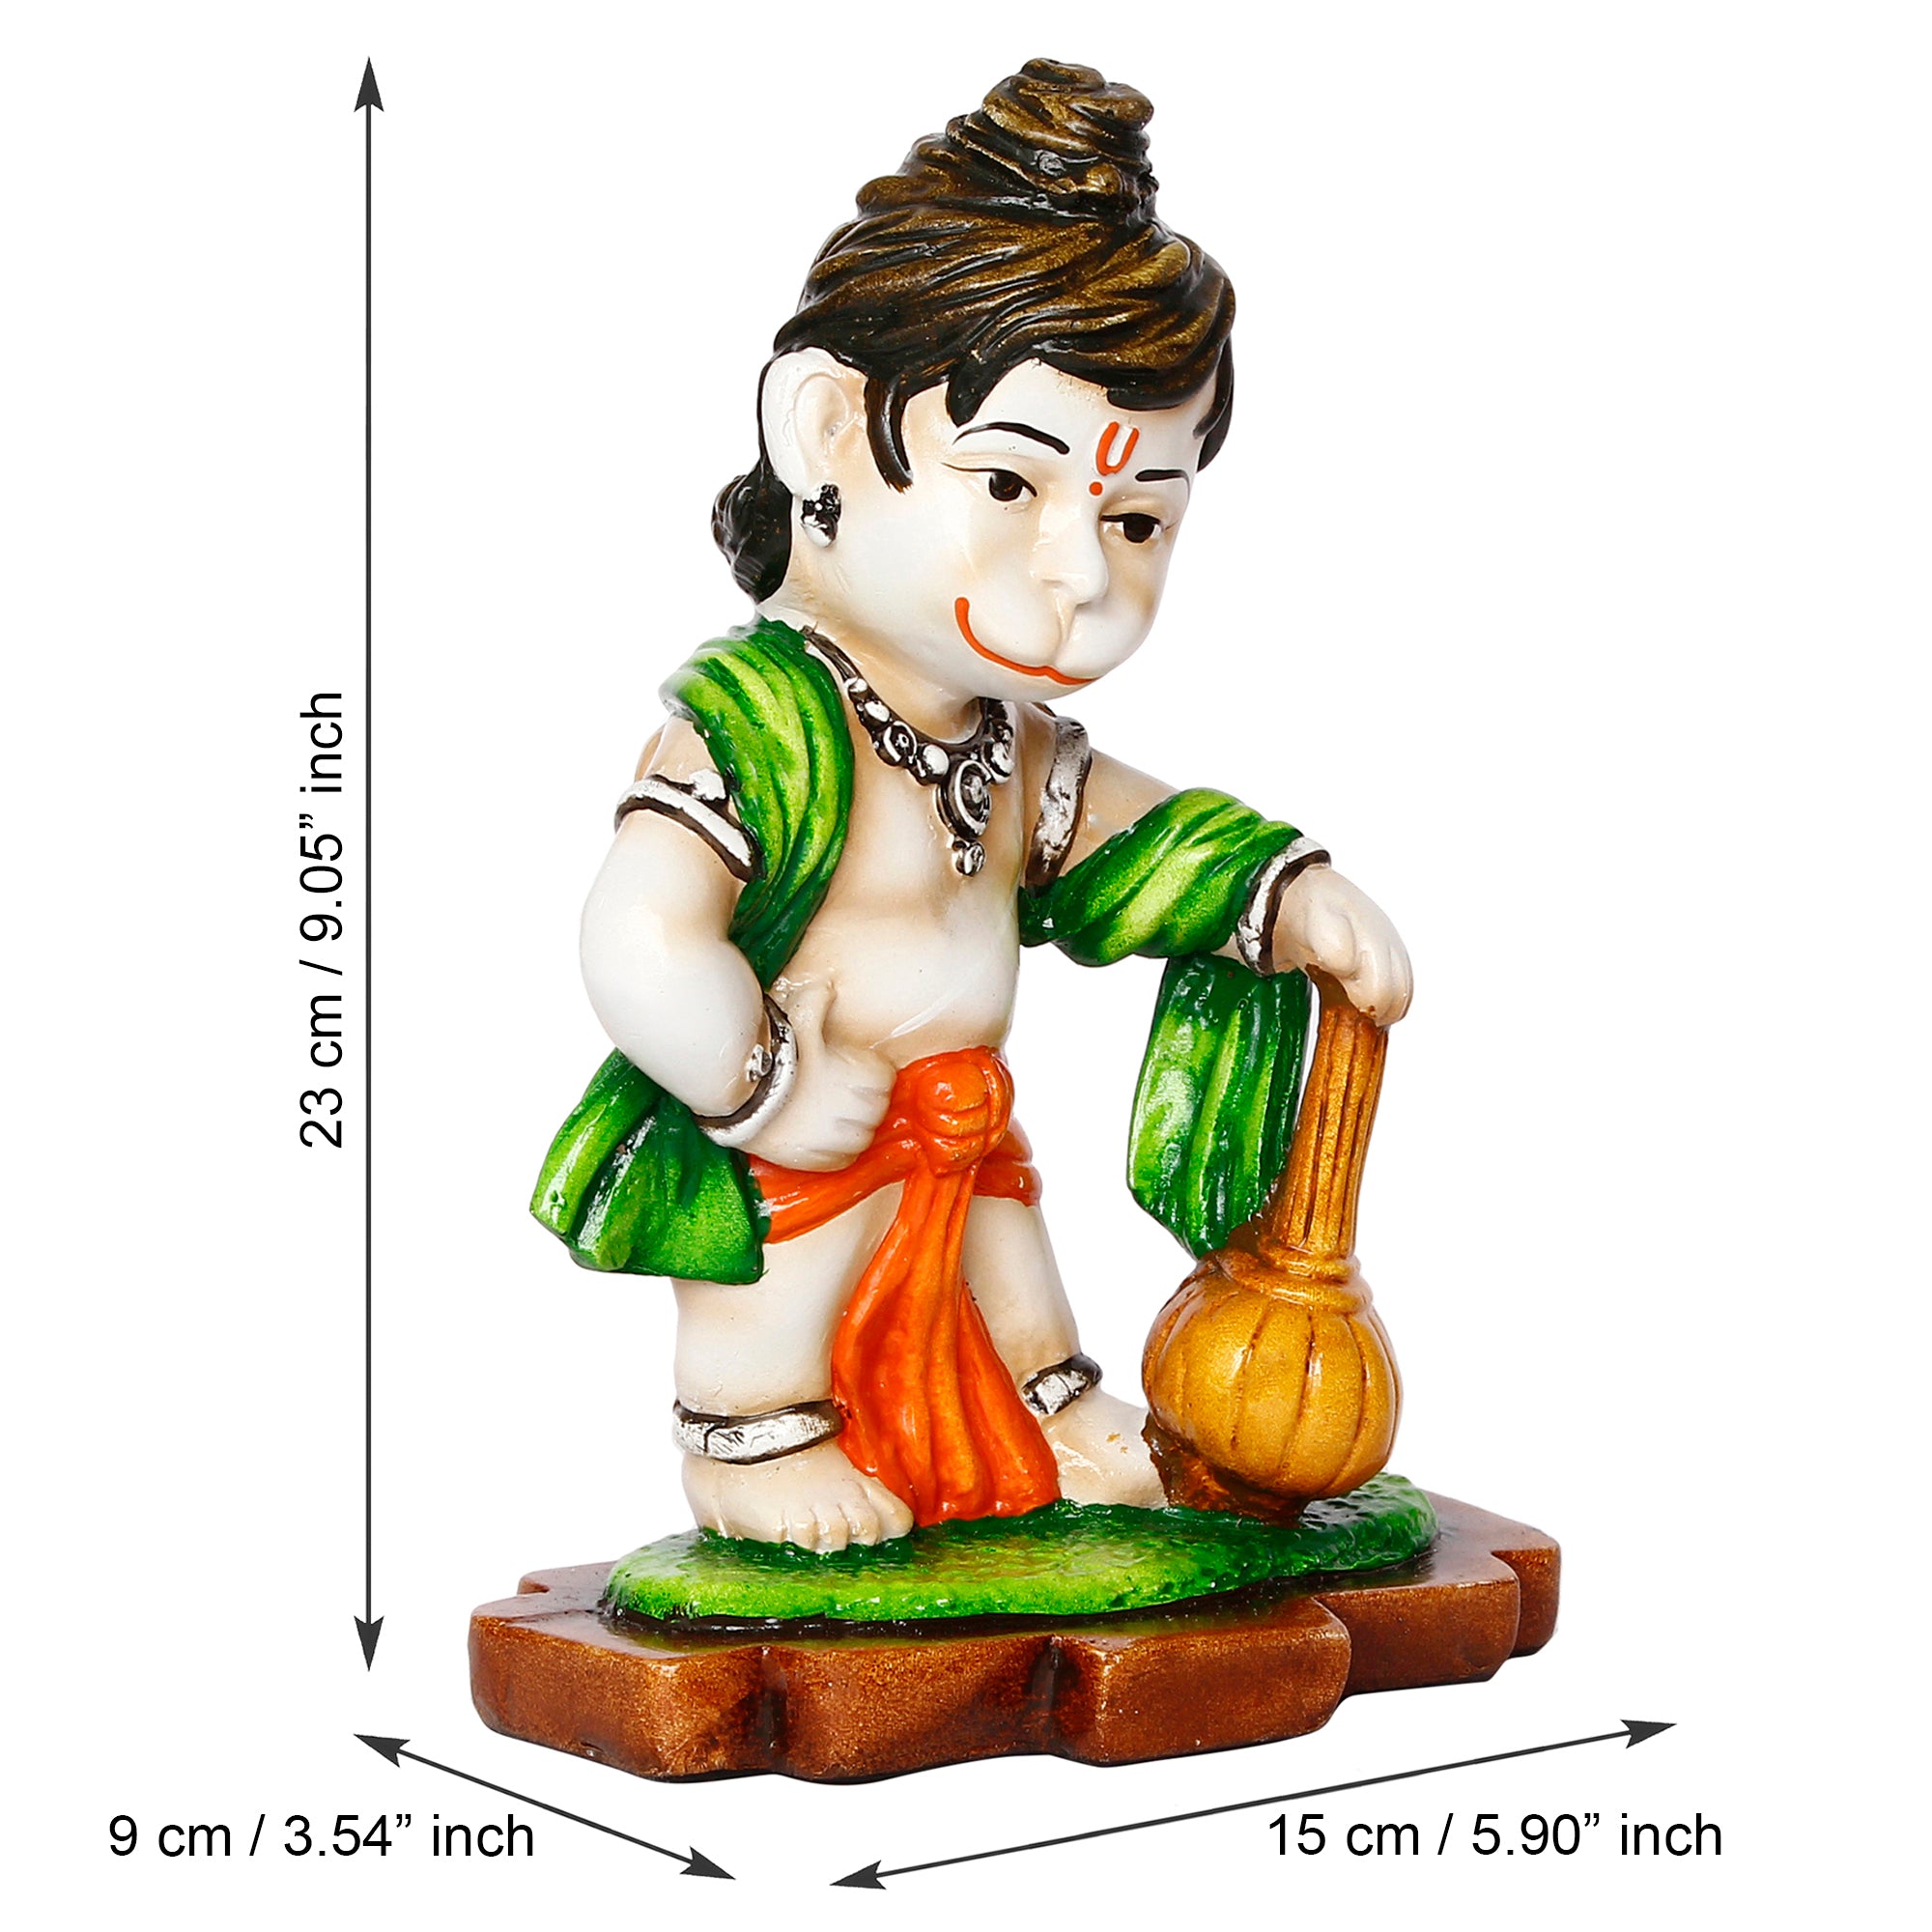 Colorful Standing Lord Hanuman Statue With Gada/Mace Handcrafted Polyresin Religious Idol 3